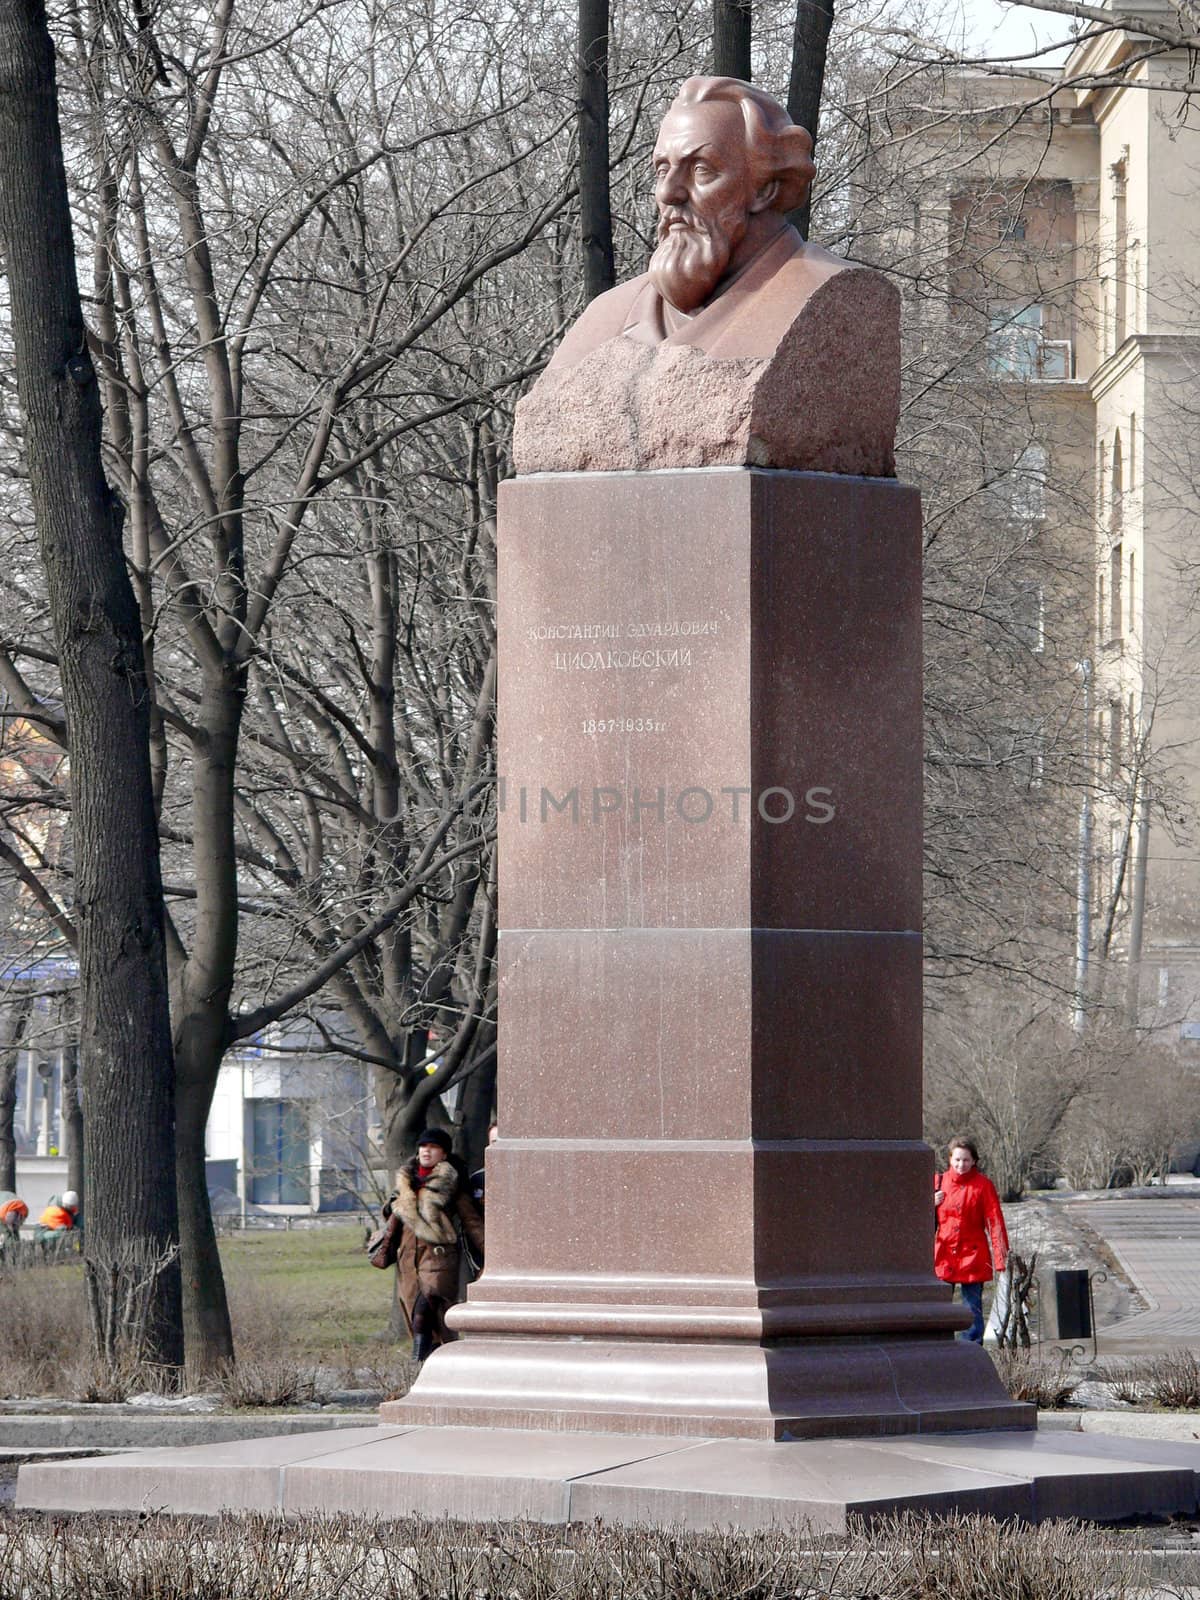 Moscow, Russia - March 27, 2010: Spring day. Peoples walks near monument of Konstantin Tsiolkovsky in Petrovski park. Moscow, Russia